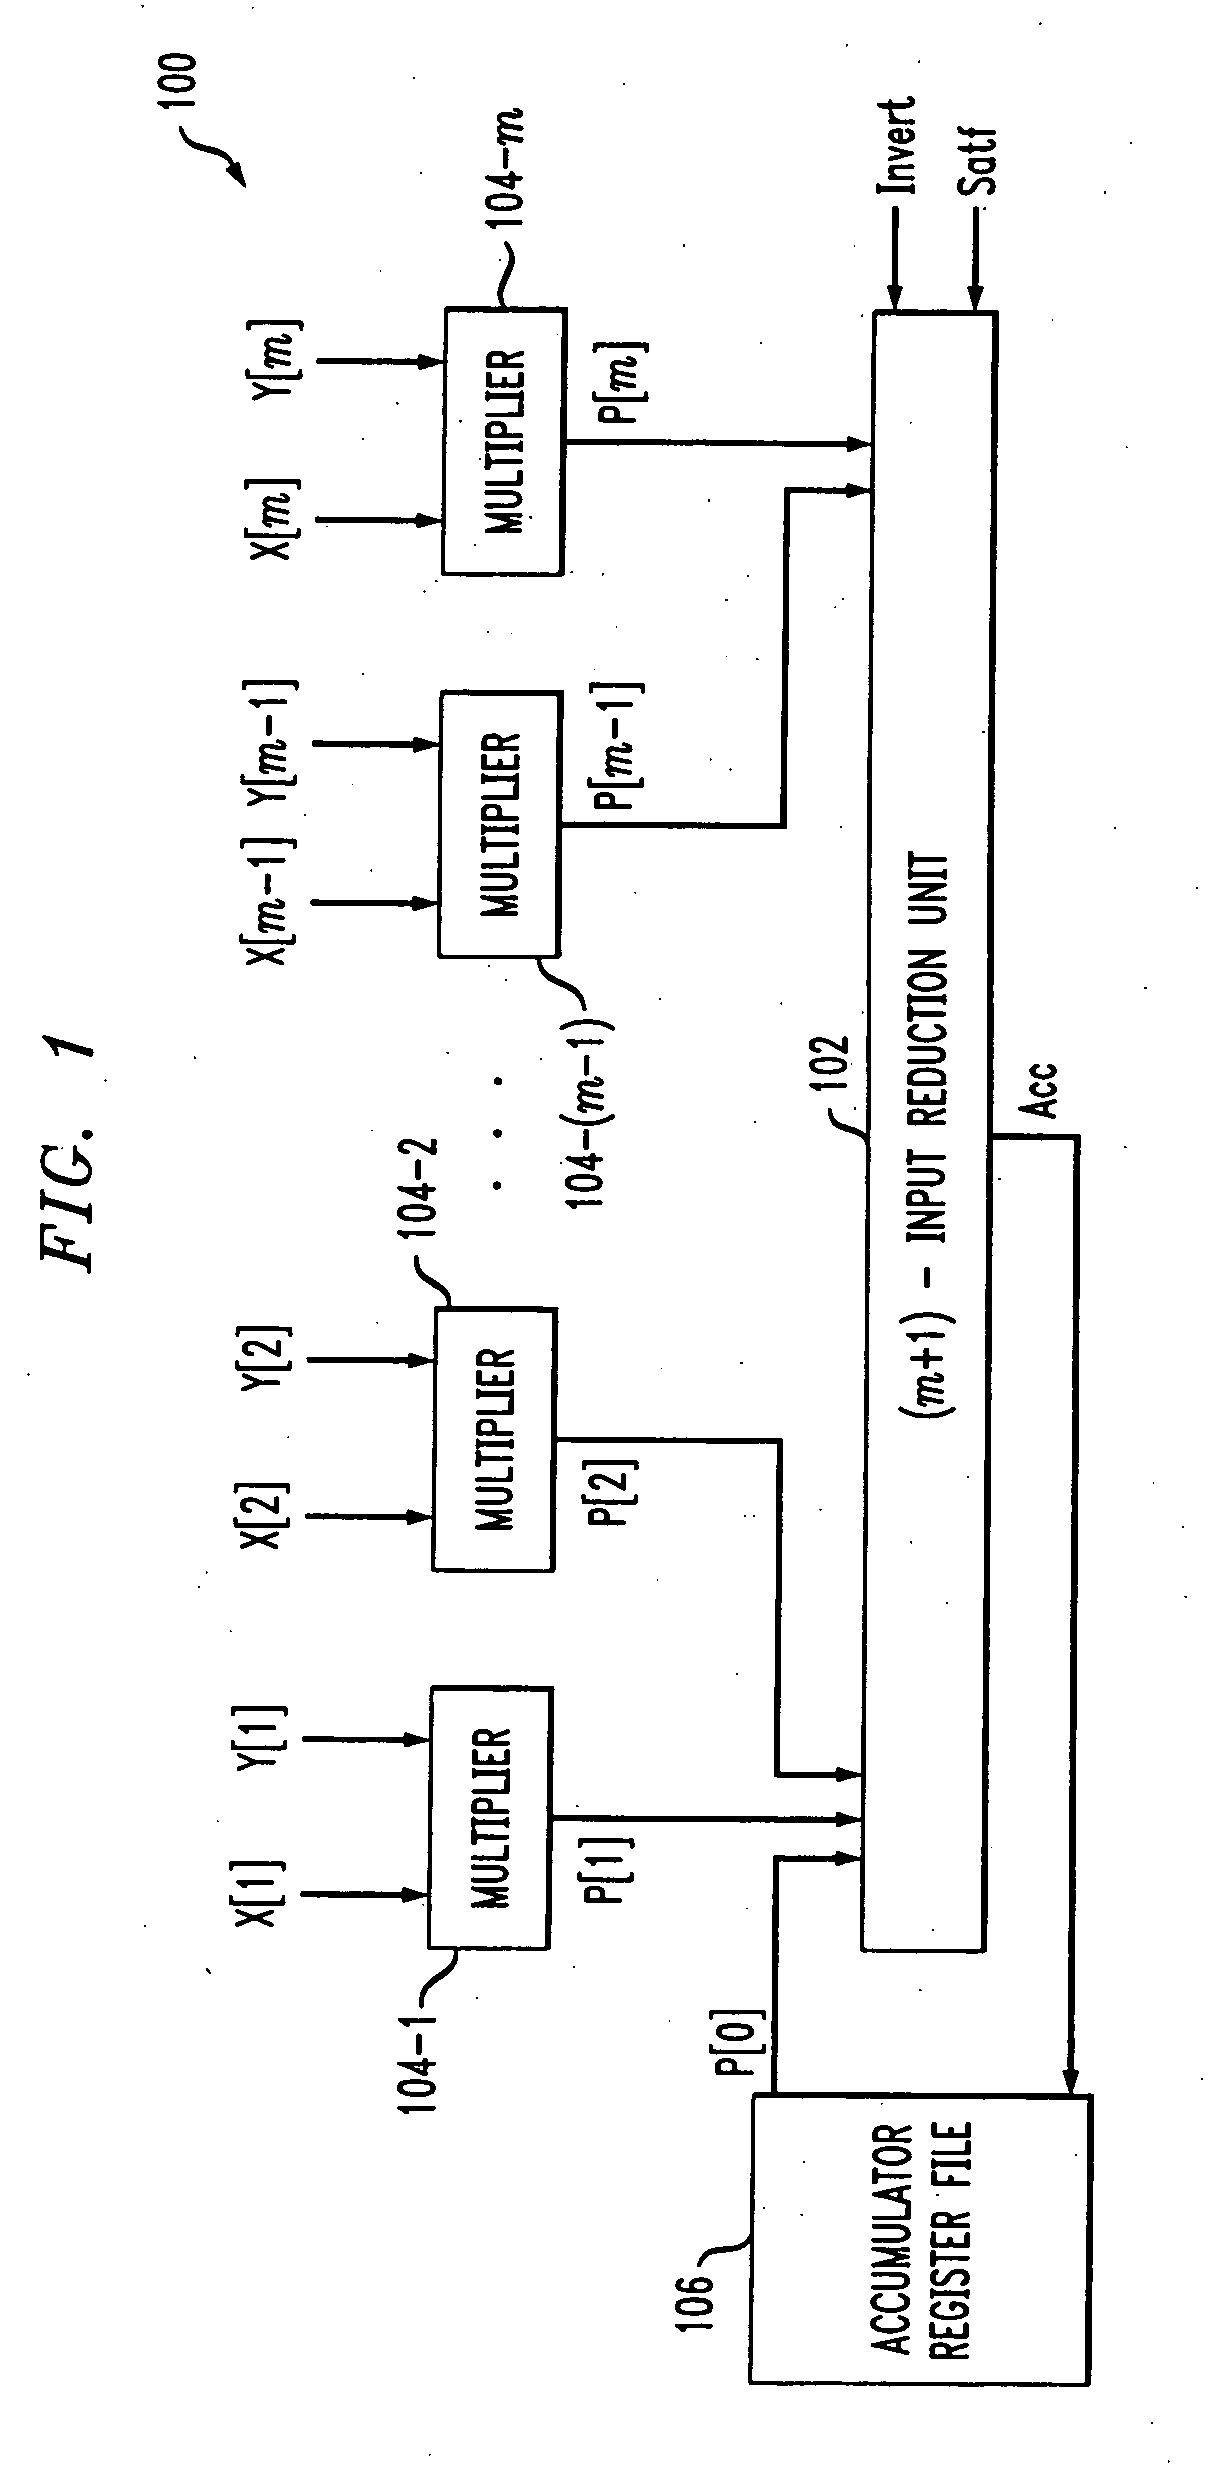 Processor having parallel vector multiply and reduce operations with sequential semantics